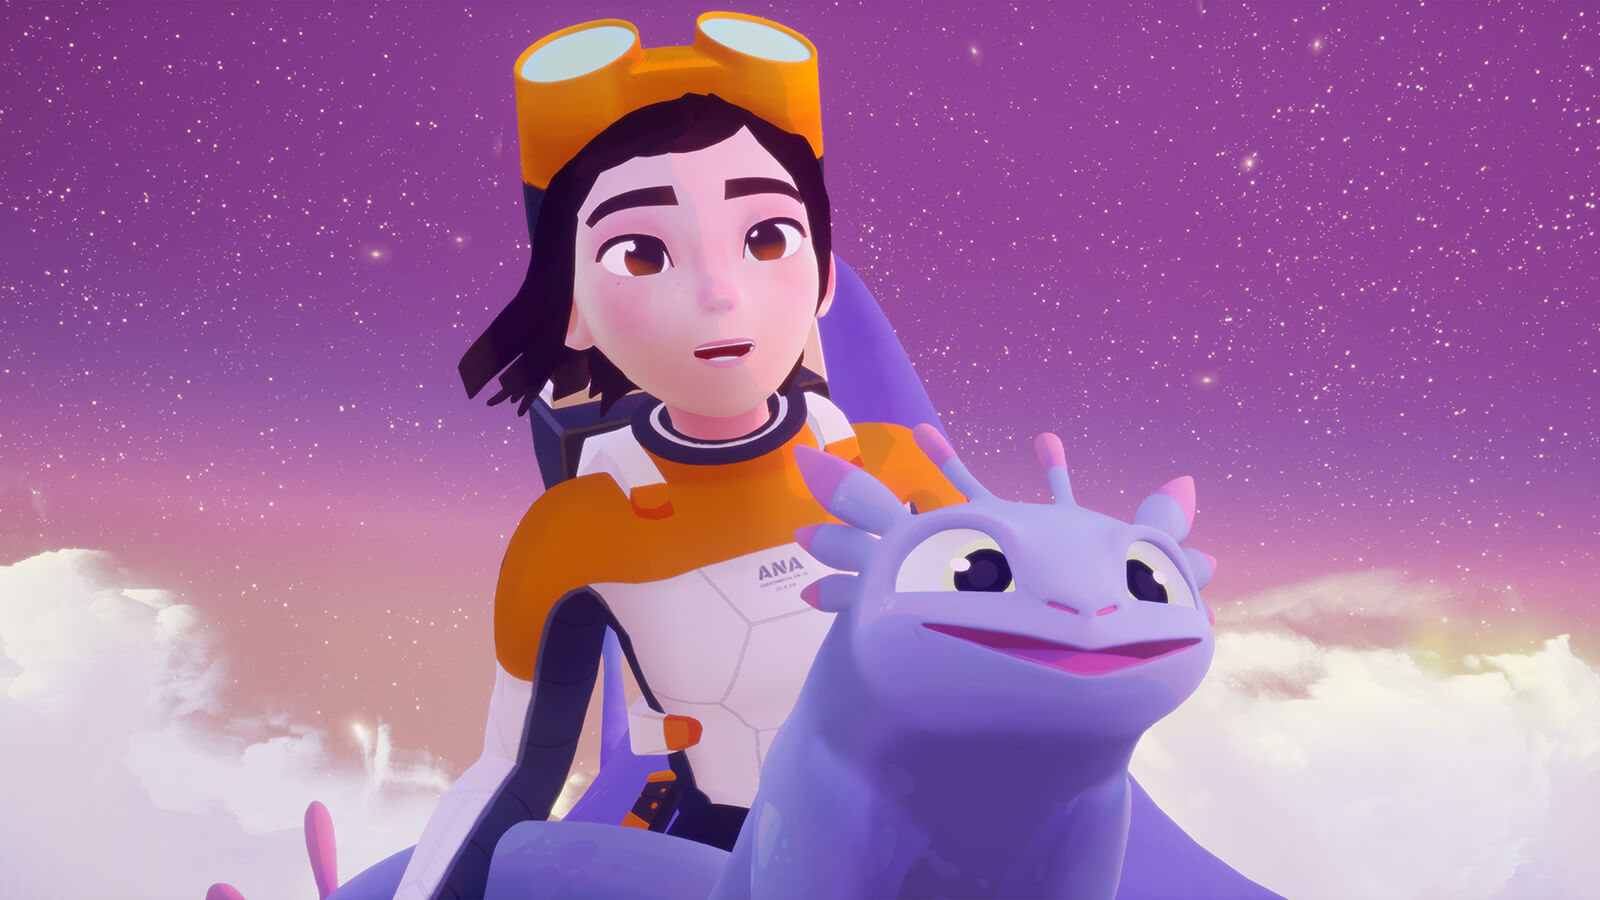 Young woman in futuristic flight suit rides above the clouds on a flying creature.